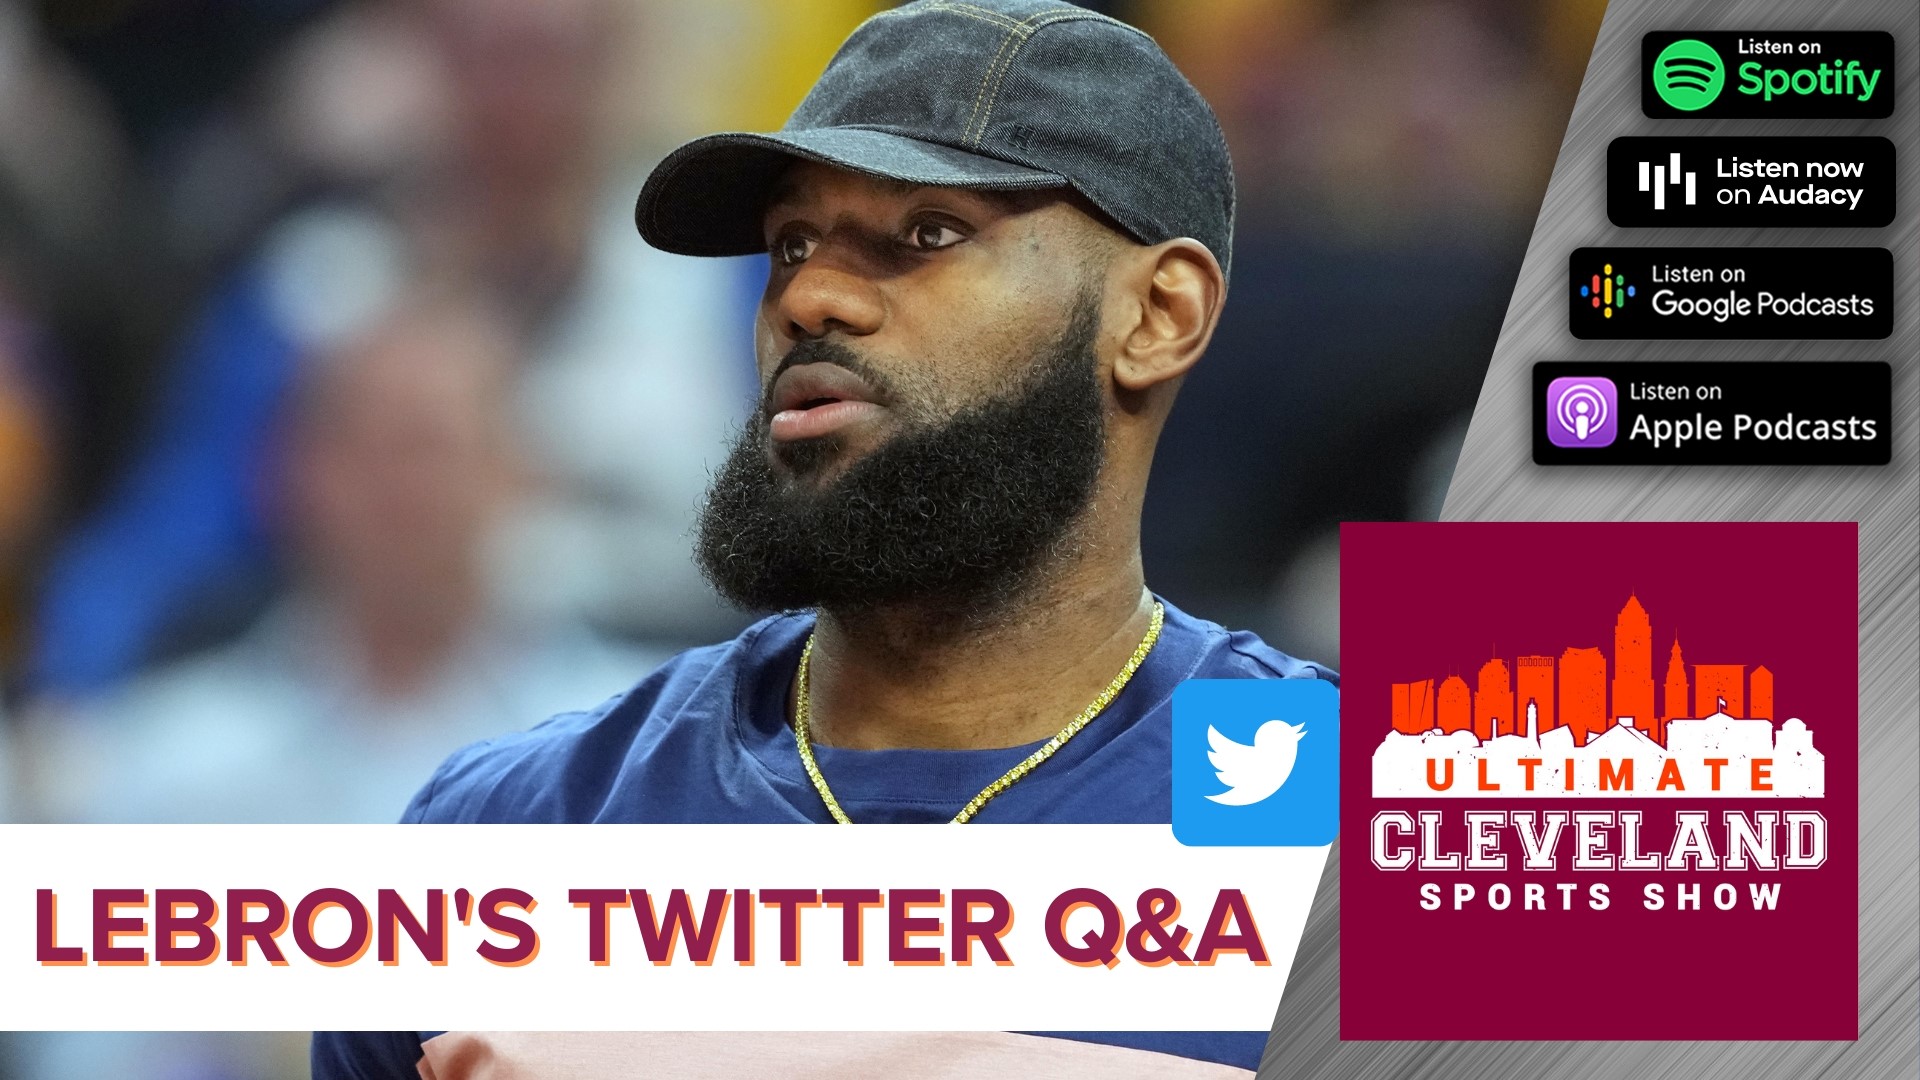 The UCSS crew reacts to LeBron's Q&A on Twitter and discusses Bronny's potential as his son and how much longer will LeBron play.